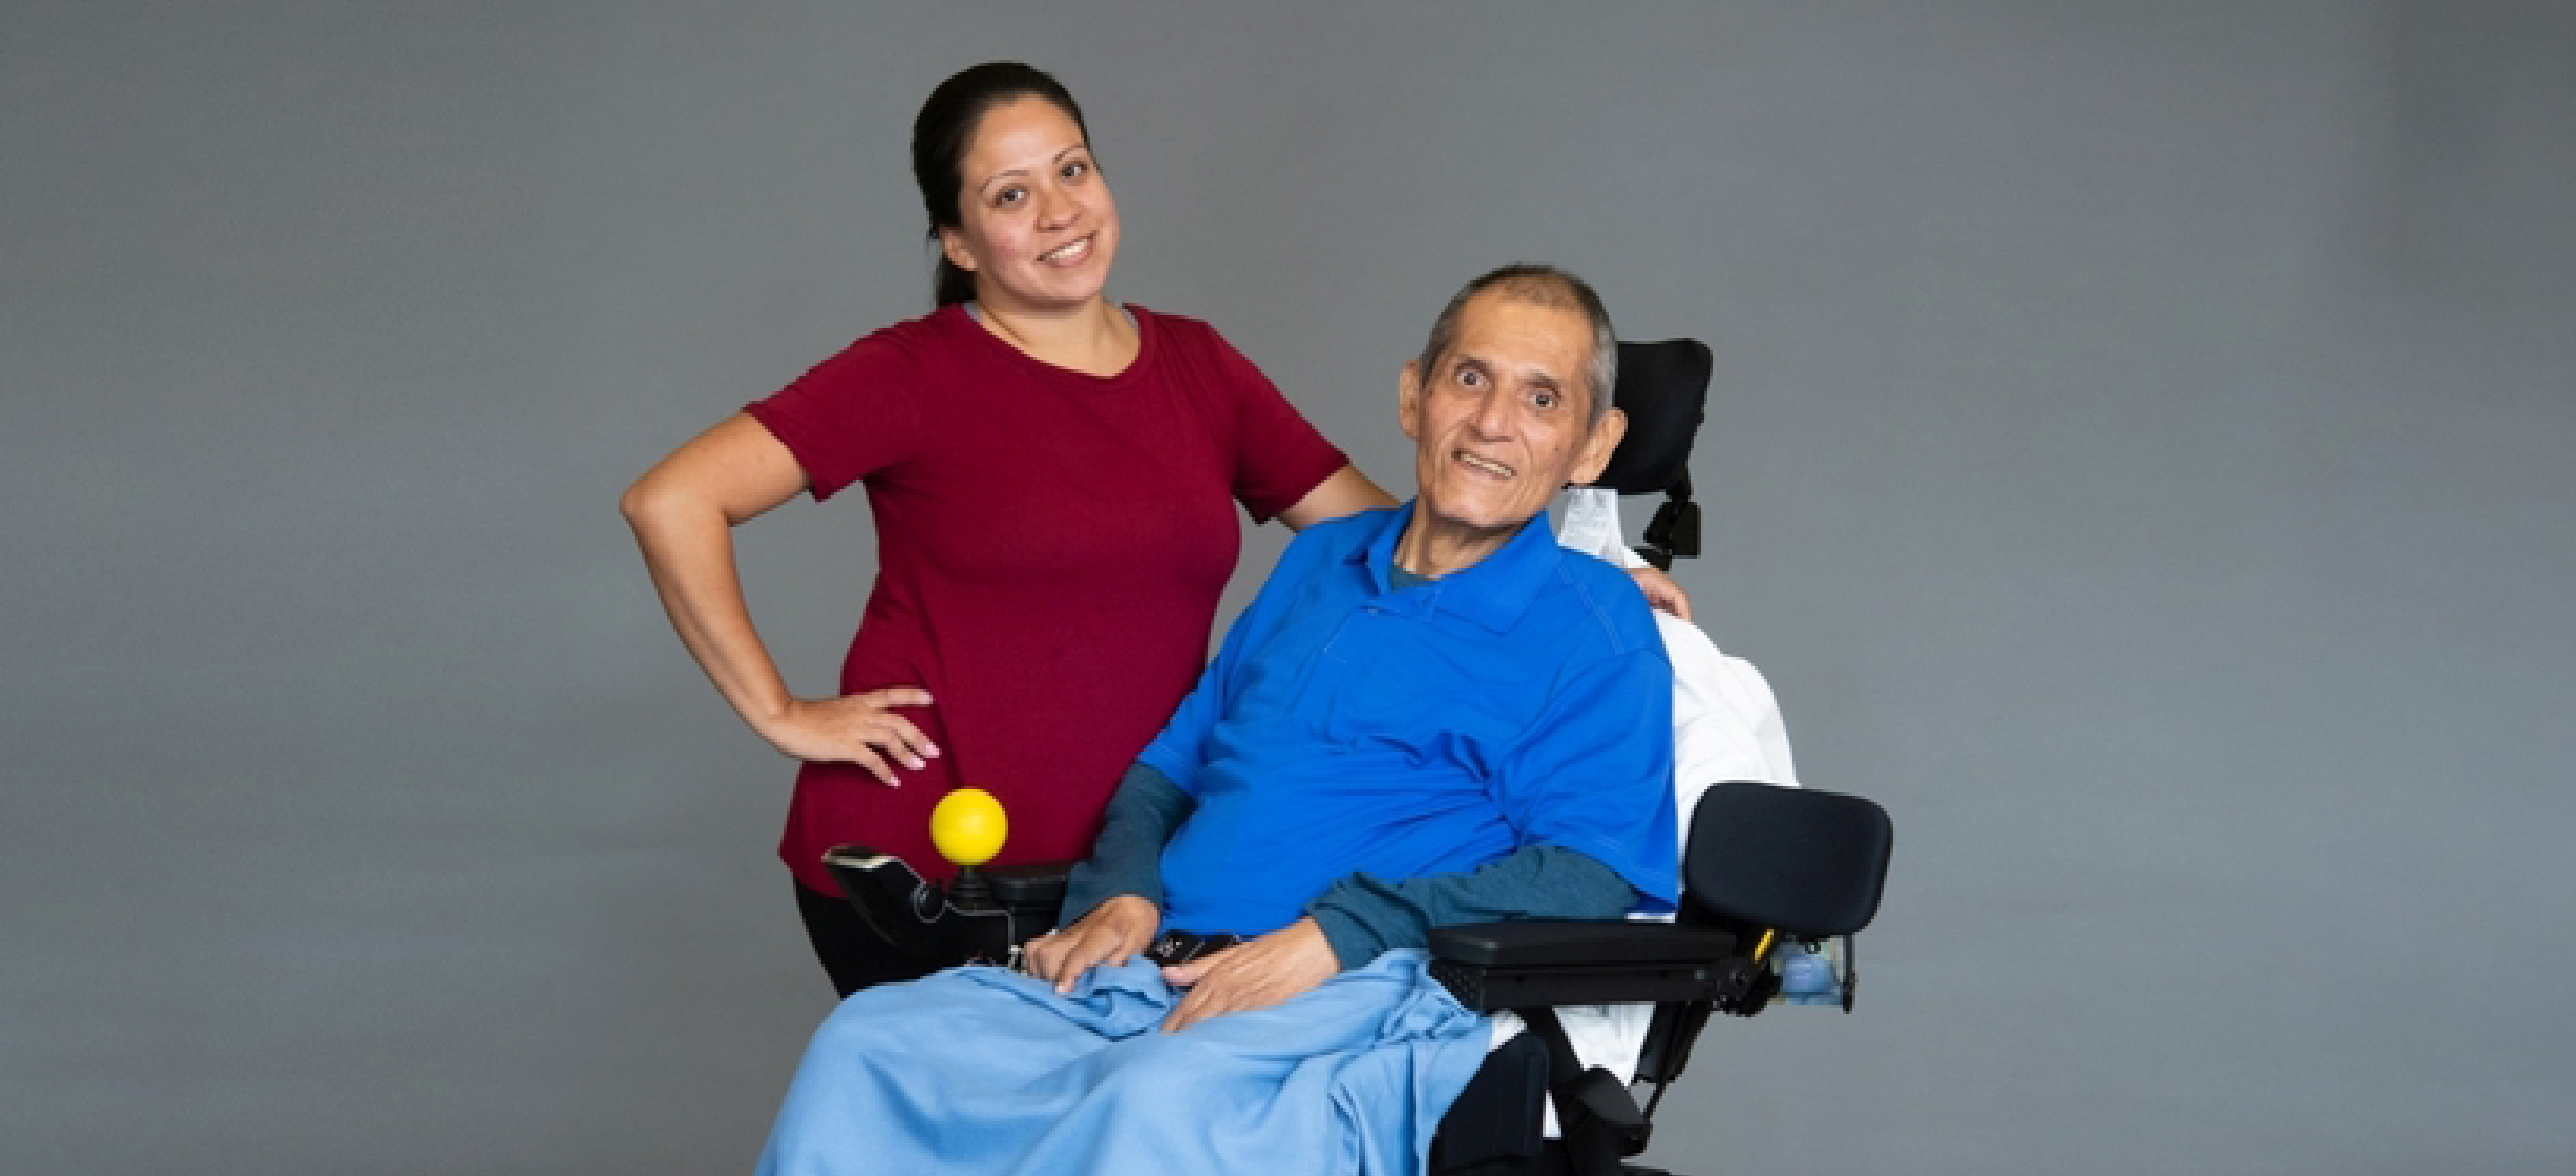 A woman with a red shirt posing with a man in a blue shirt in a wheelchair.